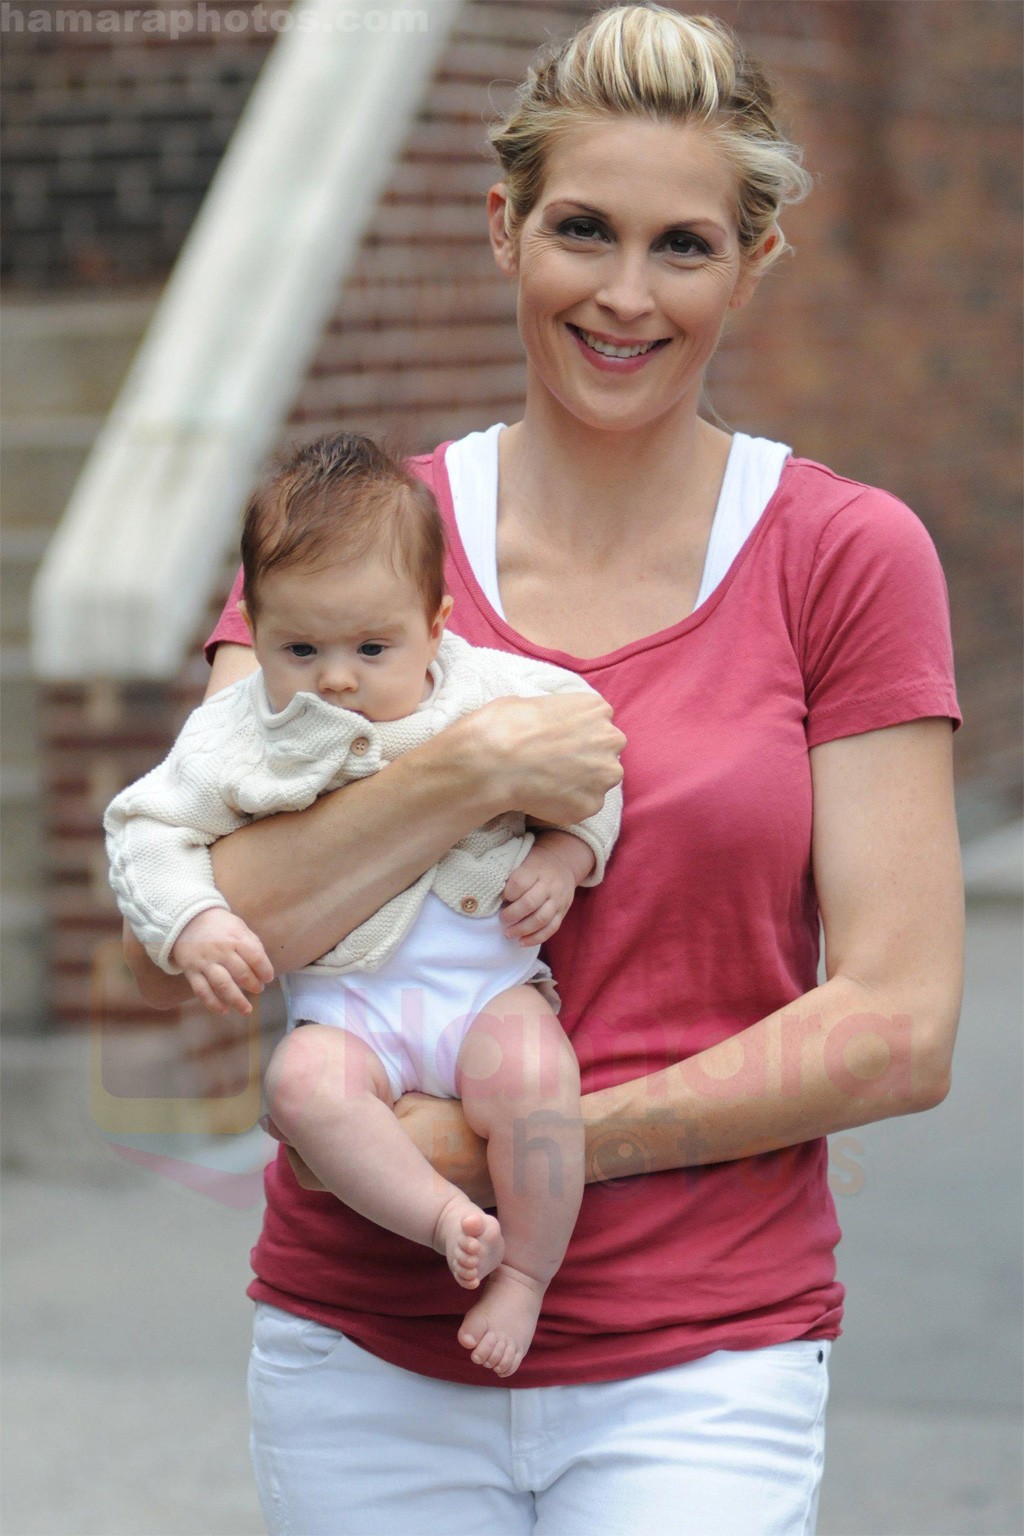 Kelly Rutherford on the set of GOSSIP GIRL in New York City on 25th August 2009 - IANS-WENN 